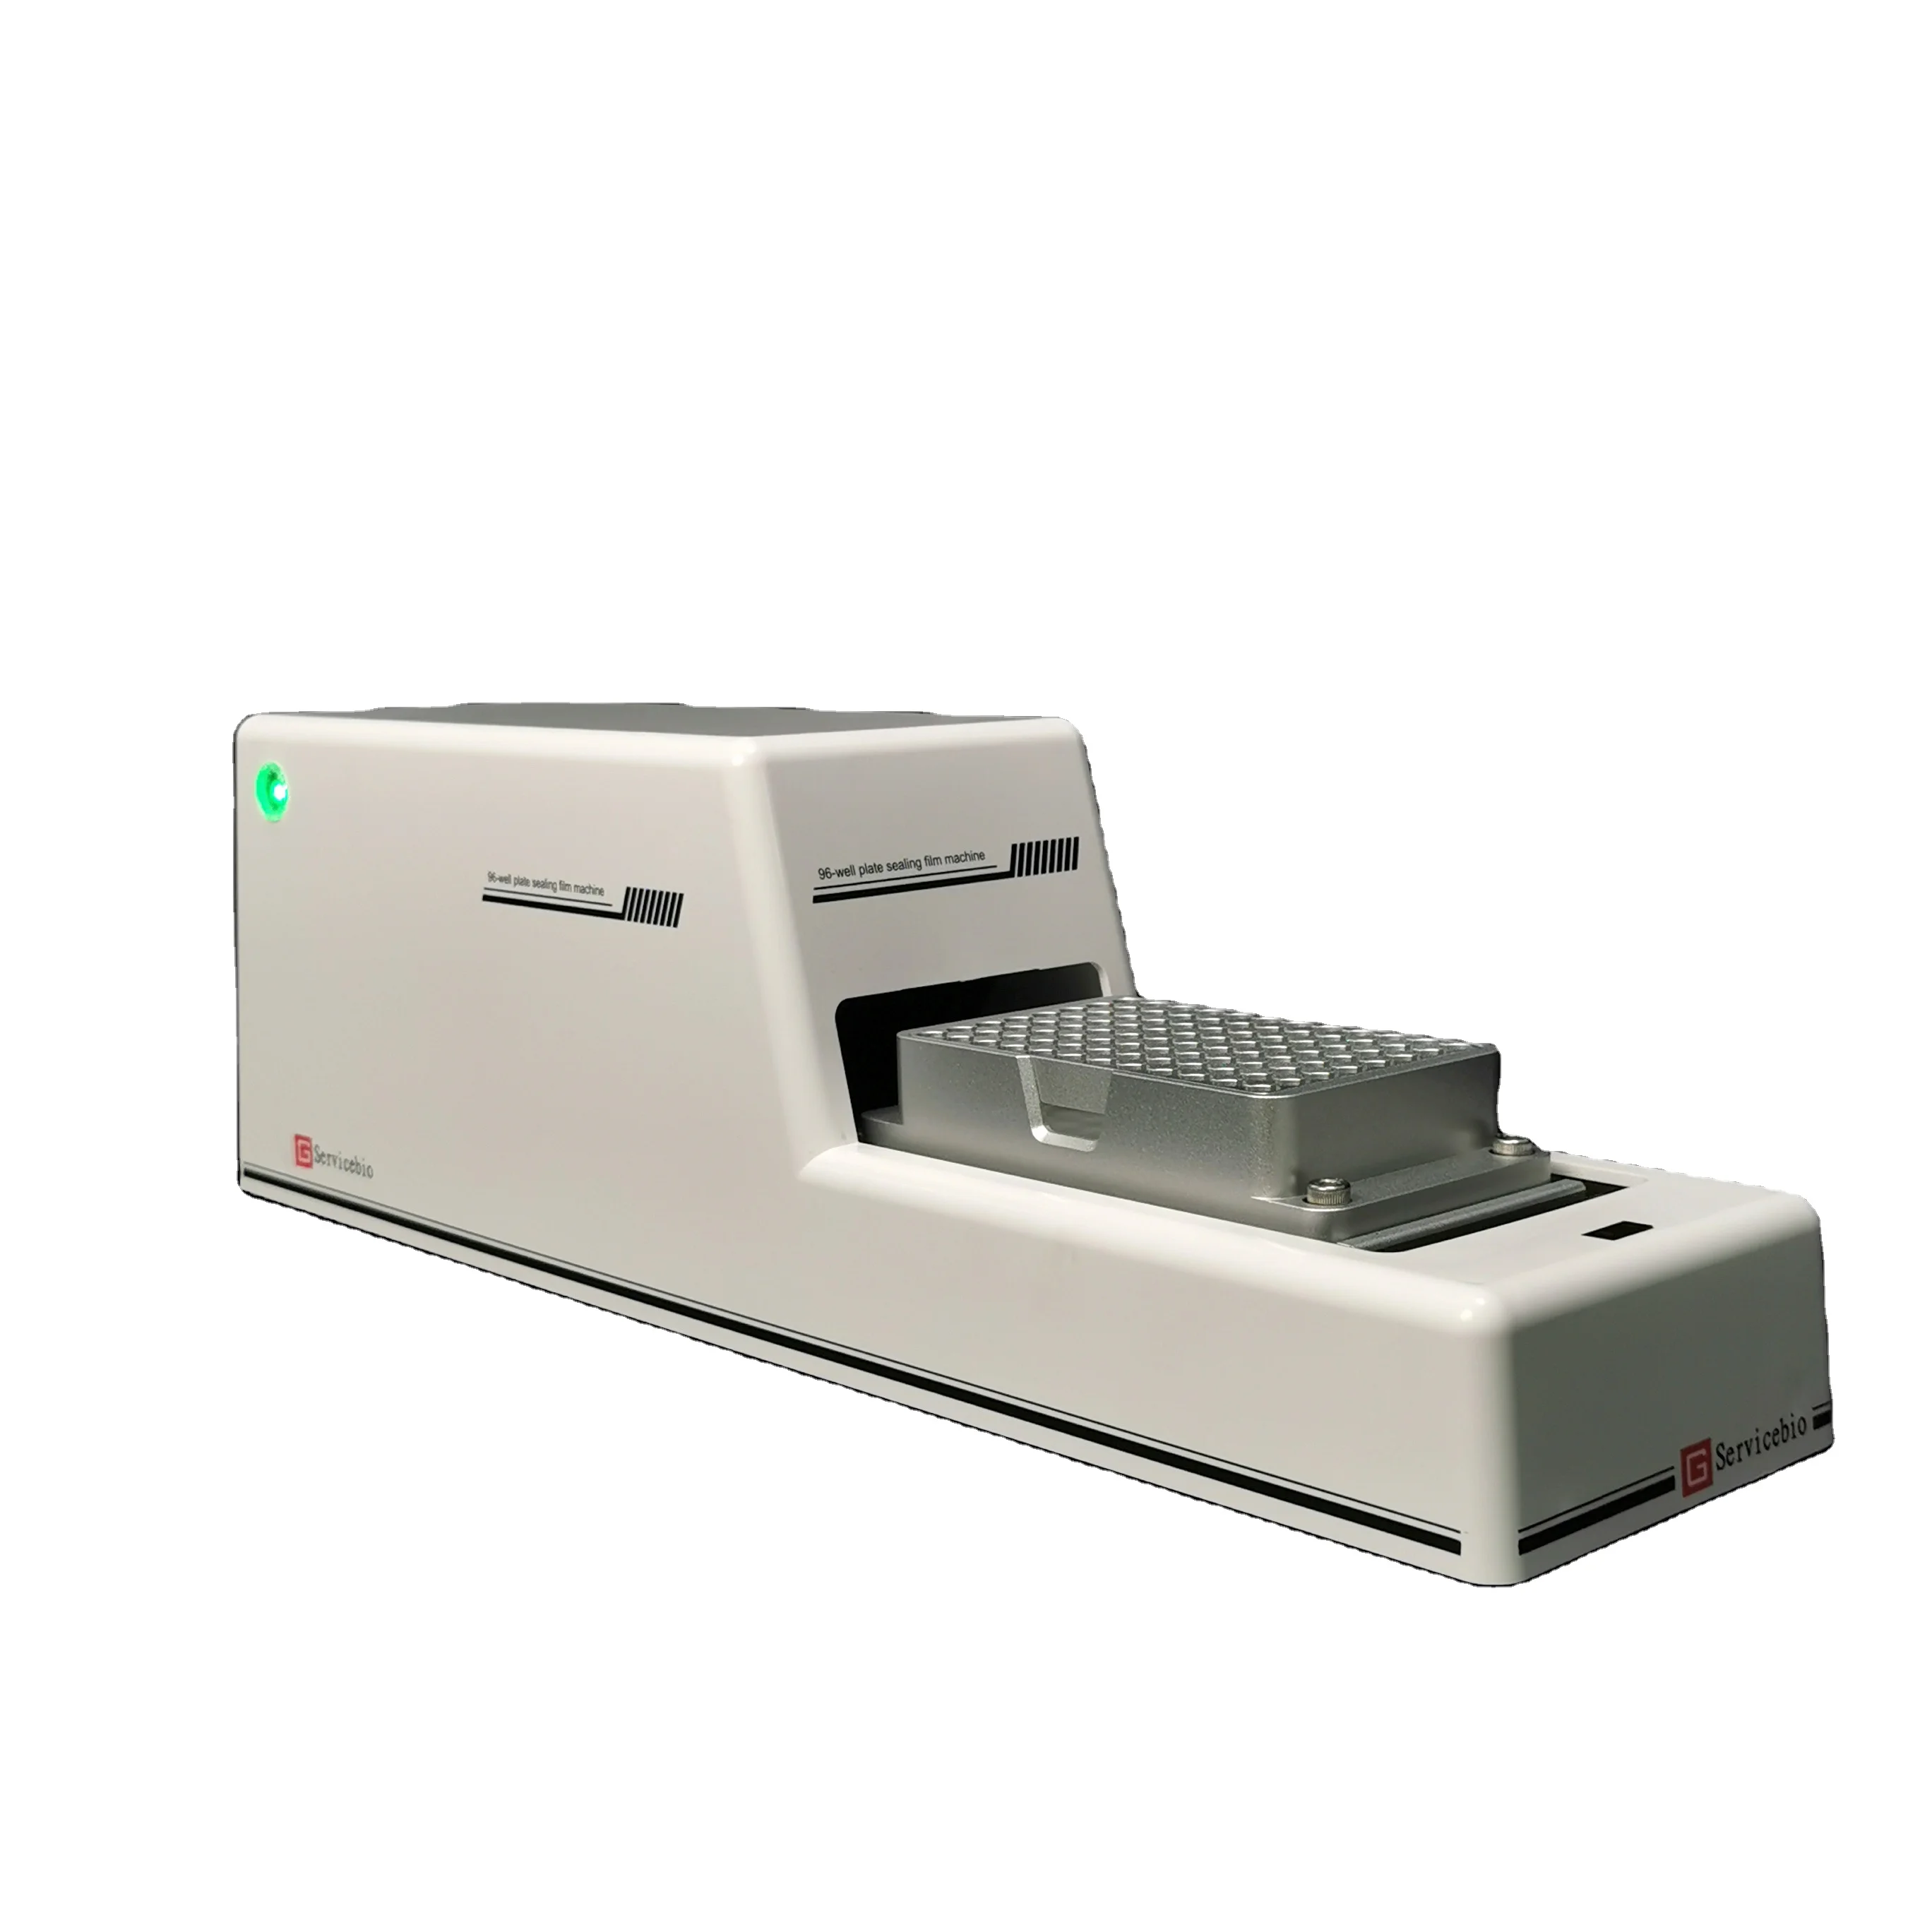 

Lab Instrument Highly Efficient Auto Film Sealing Machine Microplate PCR Plate Sealer portable Patented product